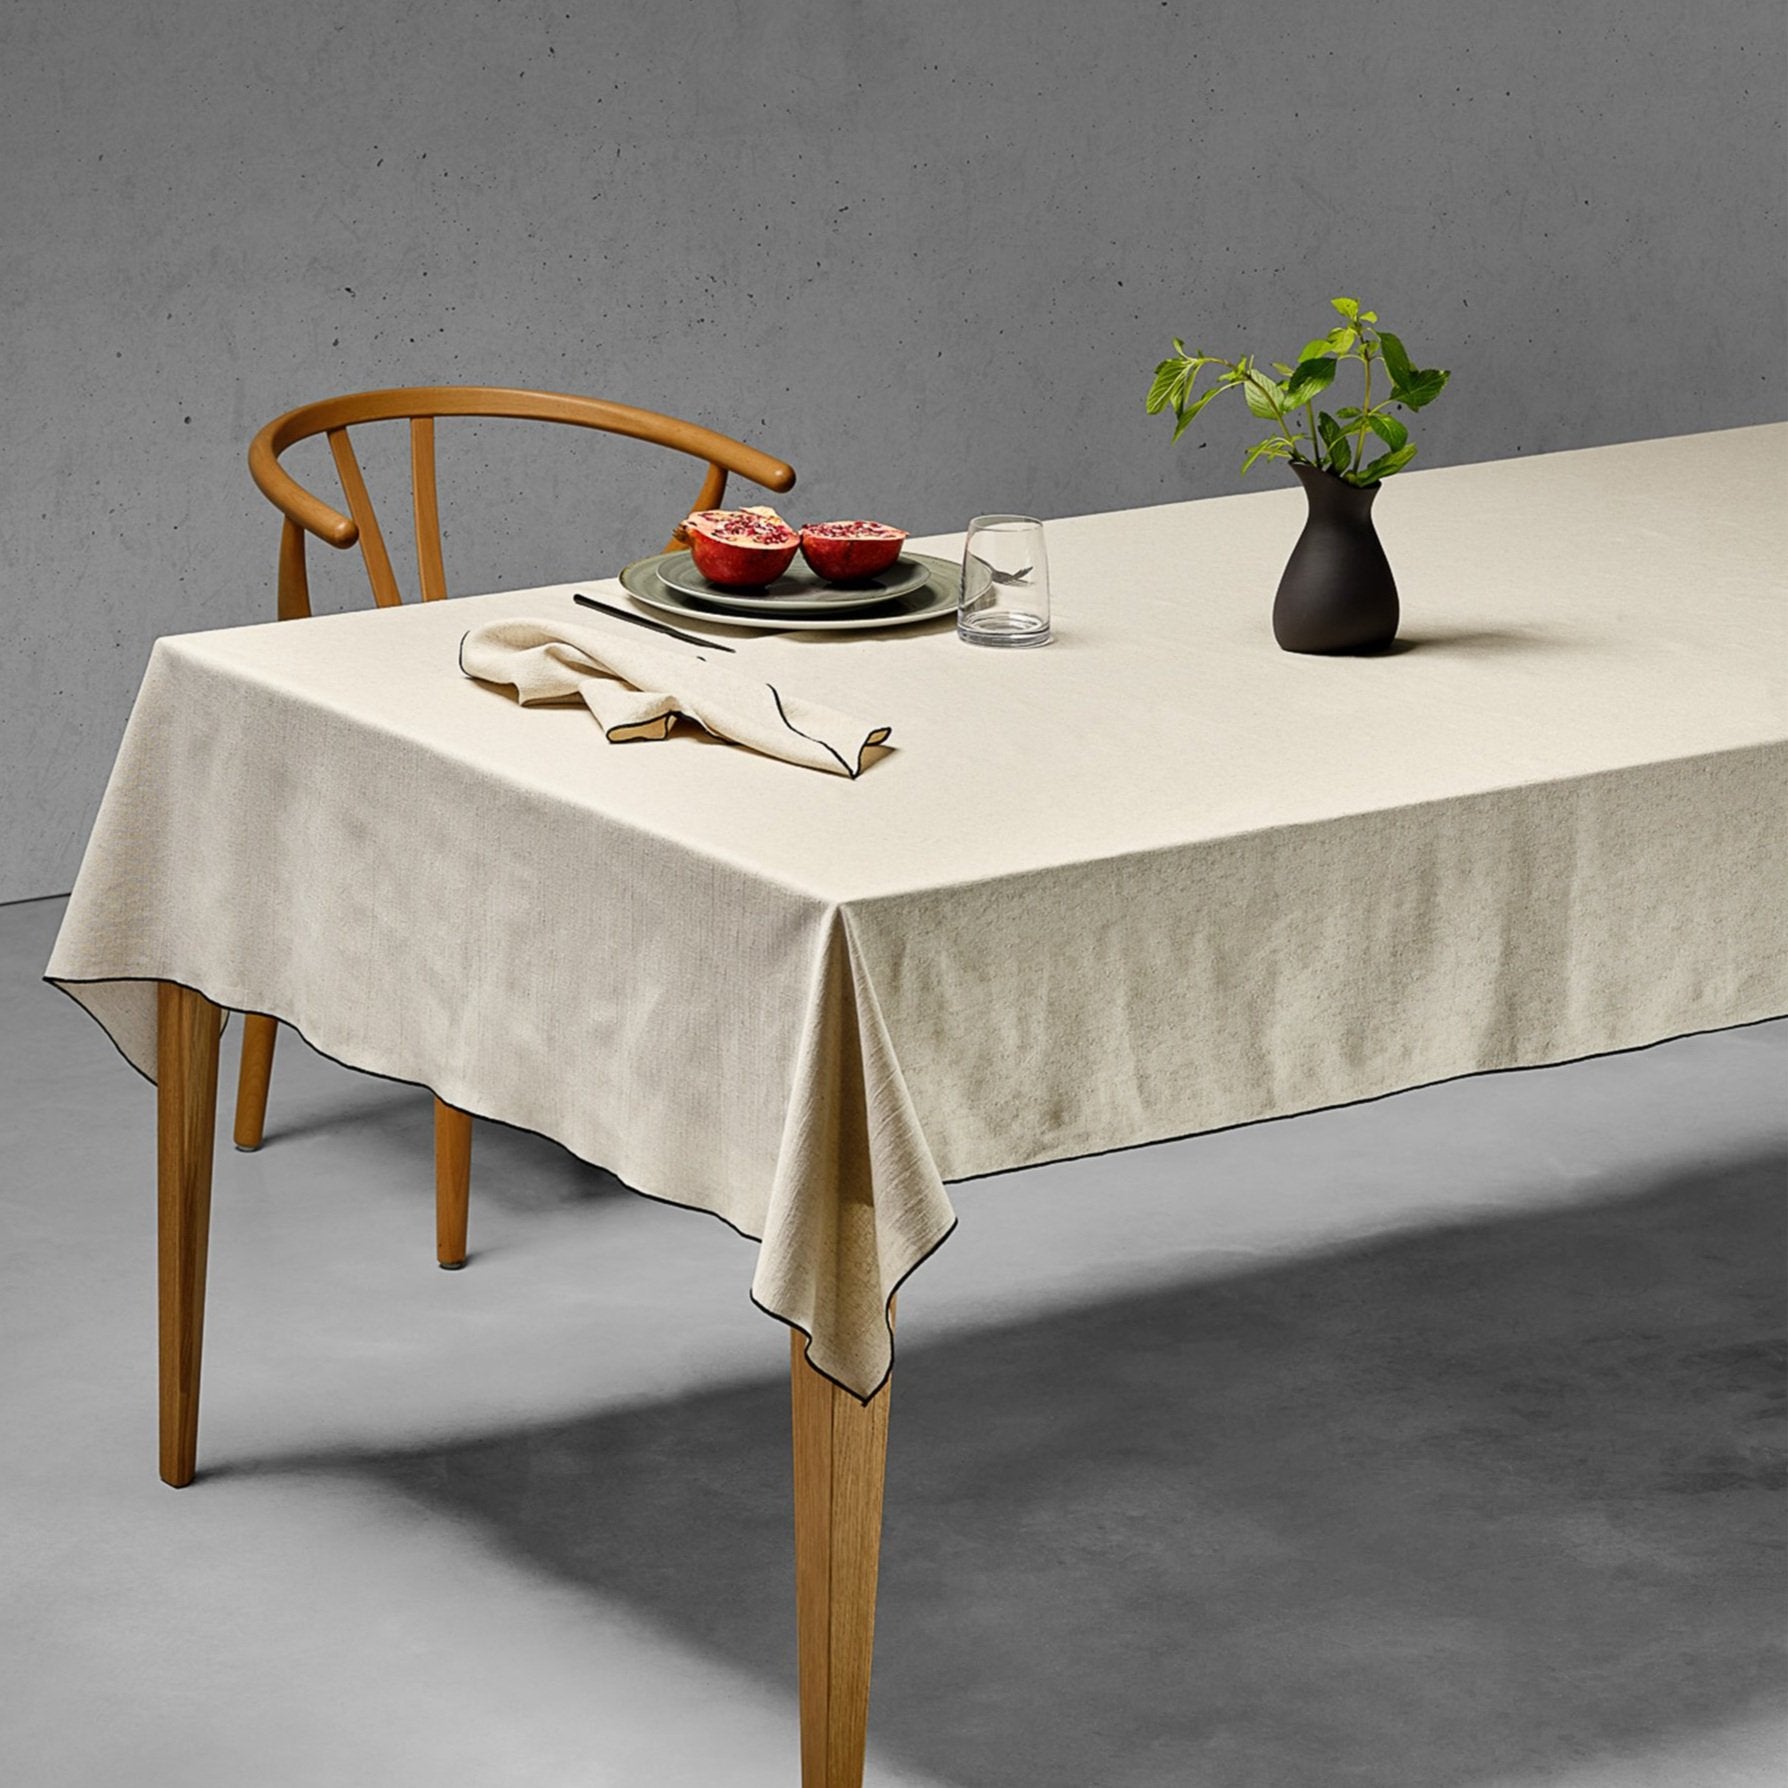 A table setting with a natural linen and cotton tablecloth (BCI cotton and Euroepean flax linen). The professionally photographed background is a concrete wall and polished concrete floor. Styled table has a handmade ceramic jug with fresh greenery, and ceramic plates. Modern mid century chair adds to the artistic style. 